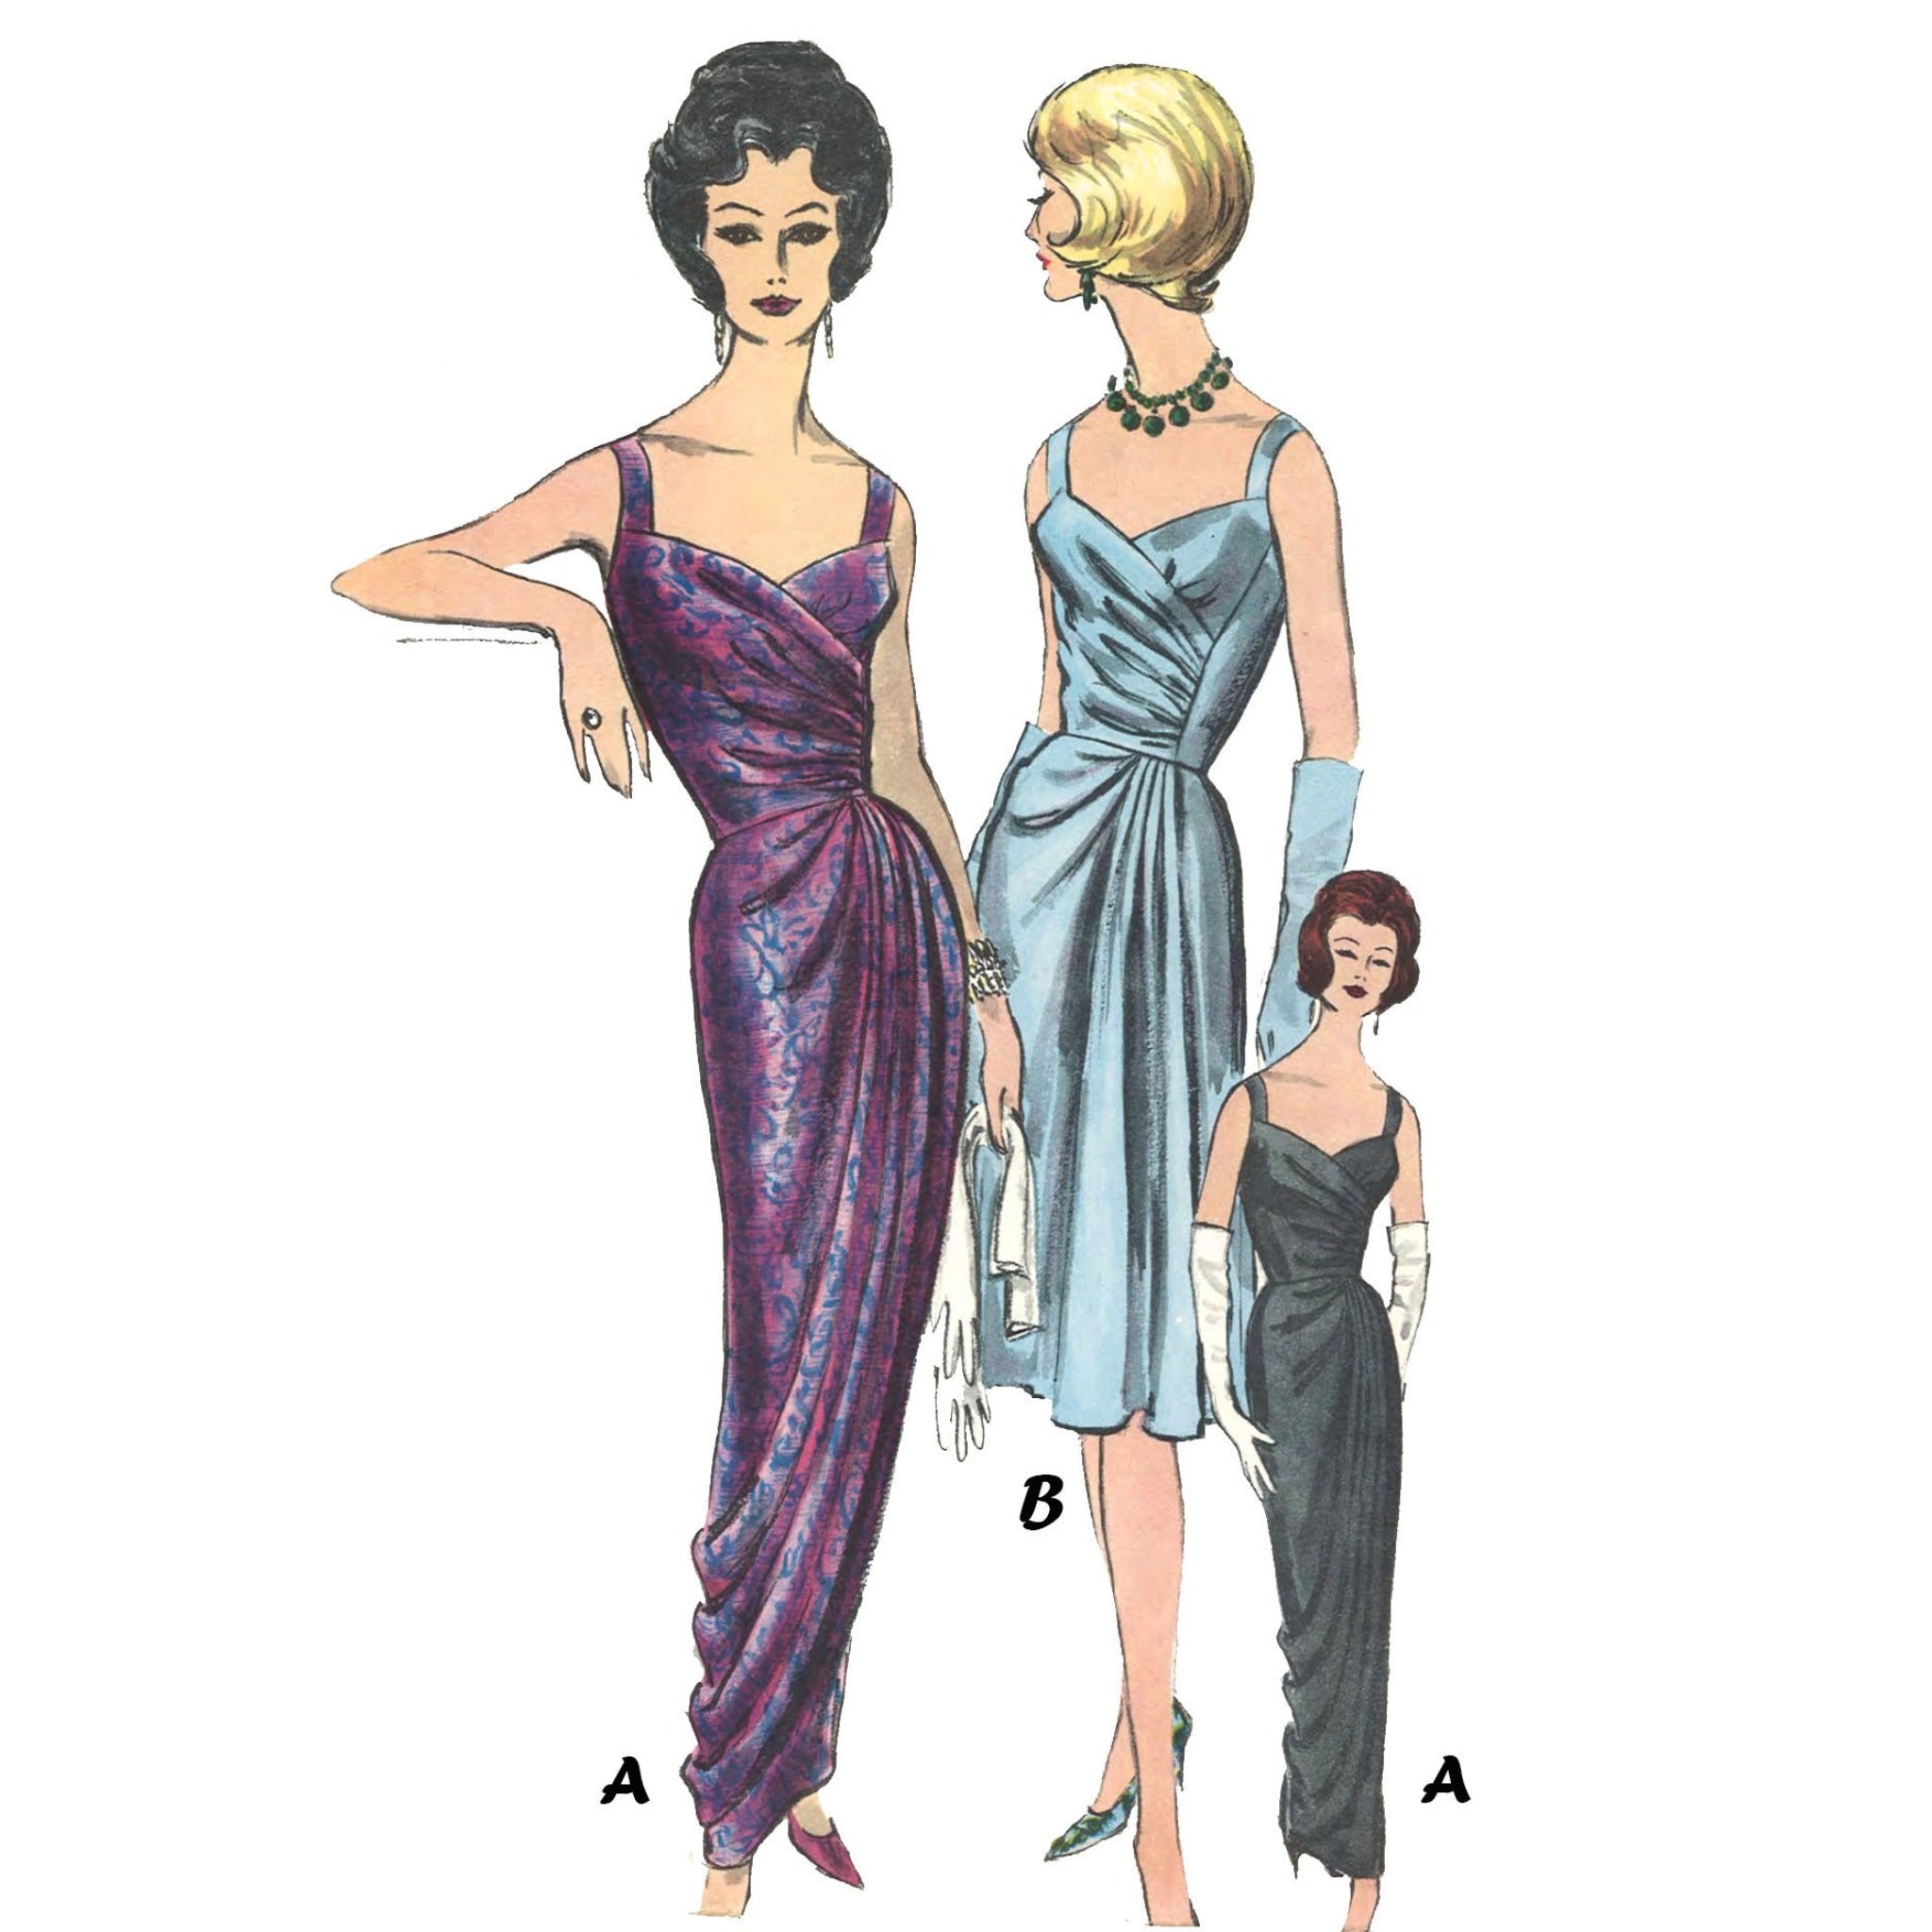 1930s 30s Evening Dress Gown Vintage Sewing Pattern PICK YOUR SIZE